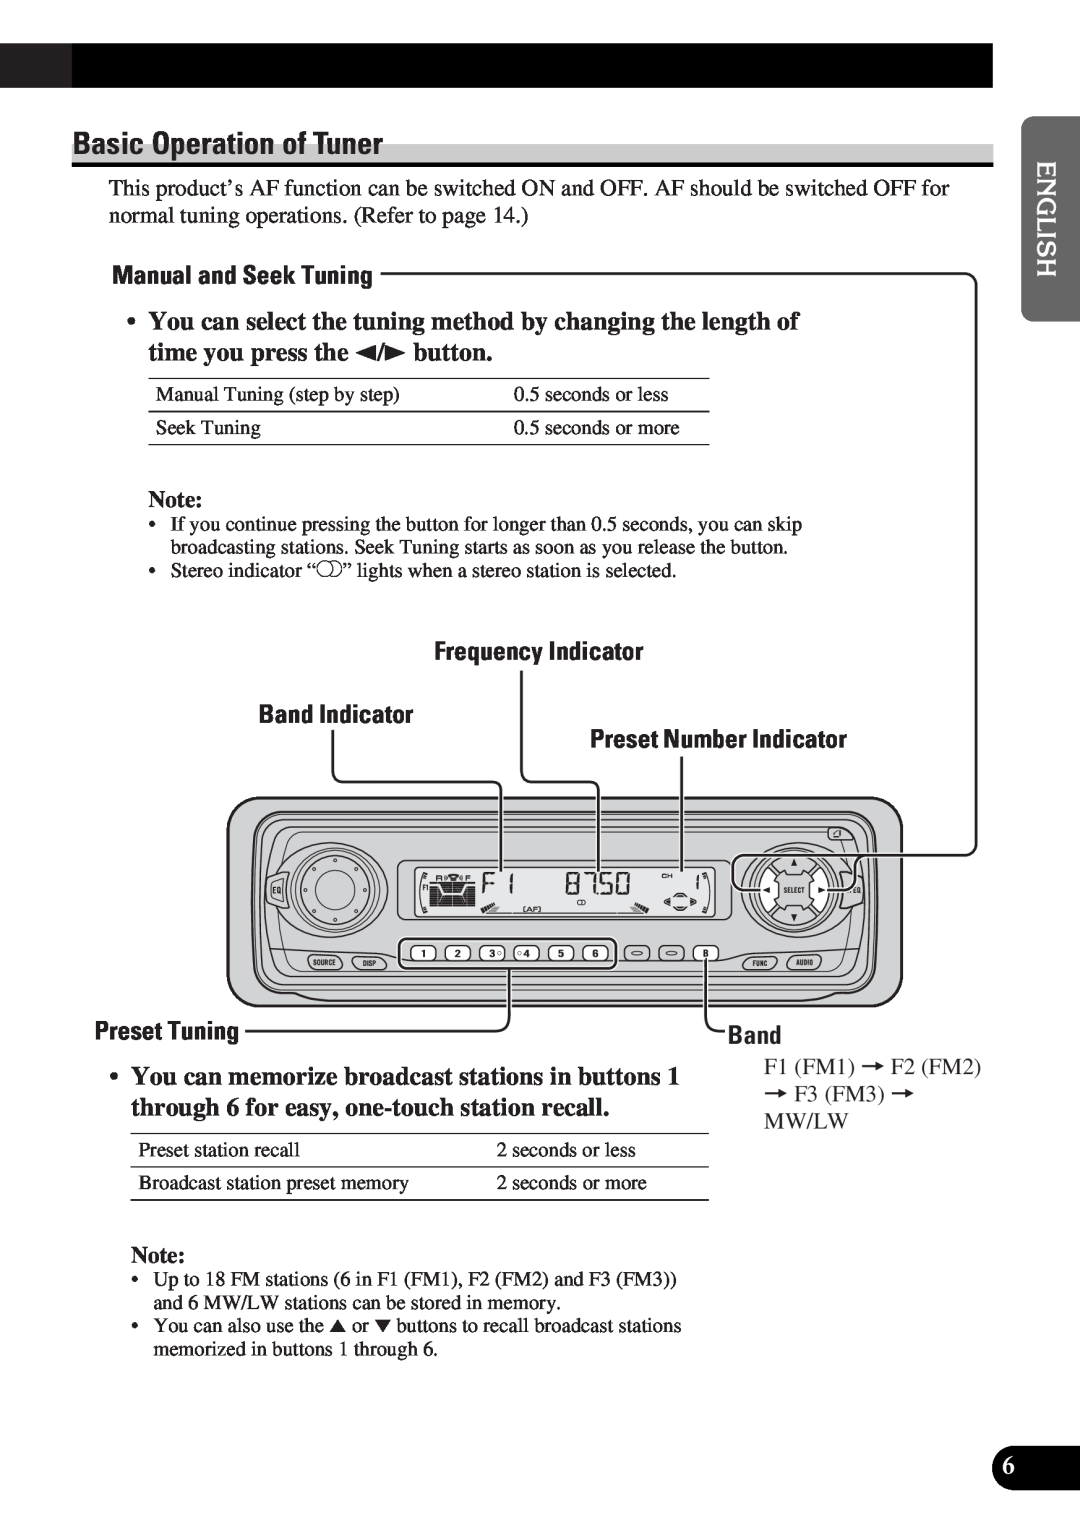 Pioneer DEH-3300R Basic Operation of Tuner, Manual and Seek Tuning, Frequency Indicator Band Indicator, Preset Tuning 